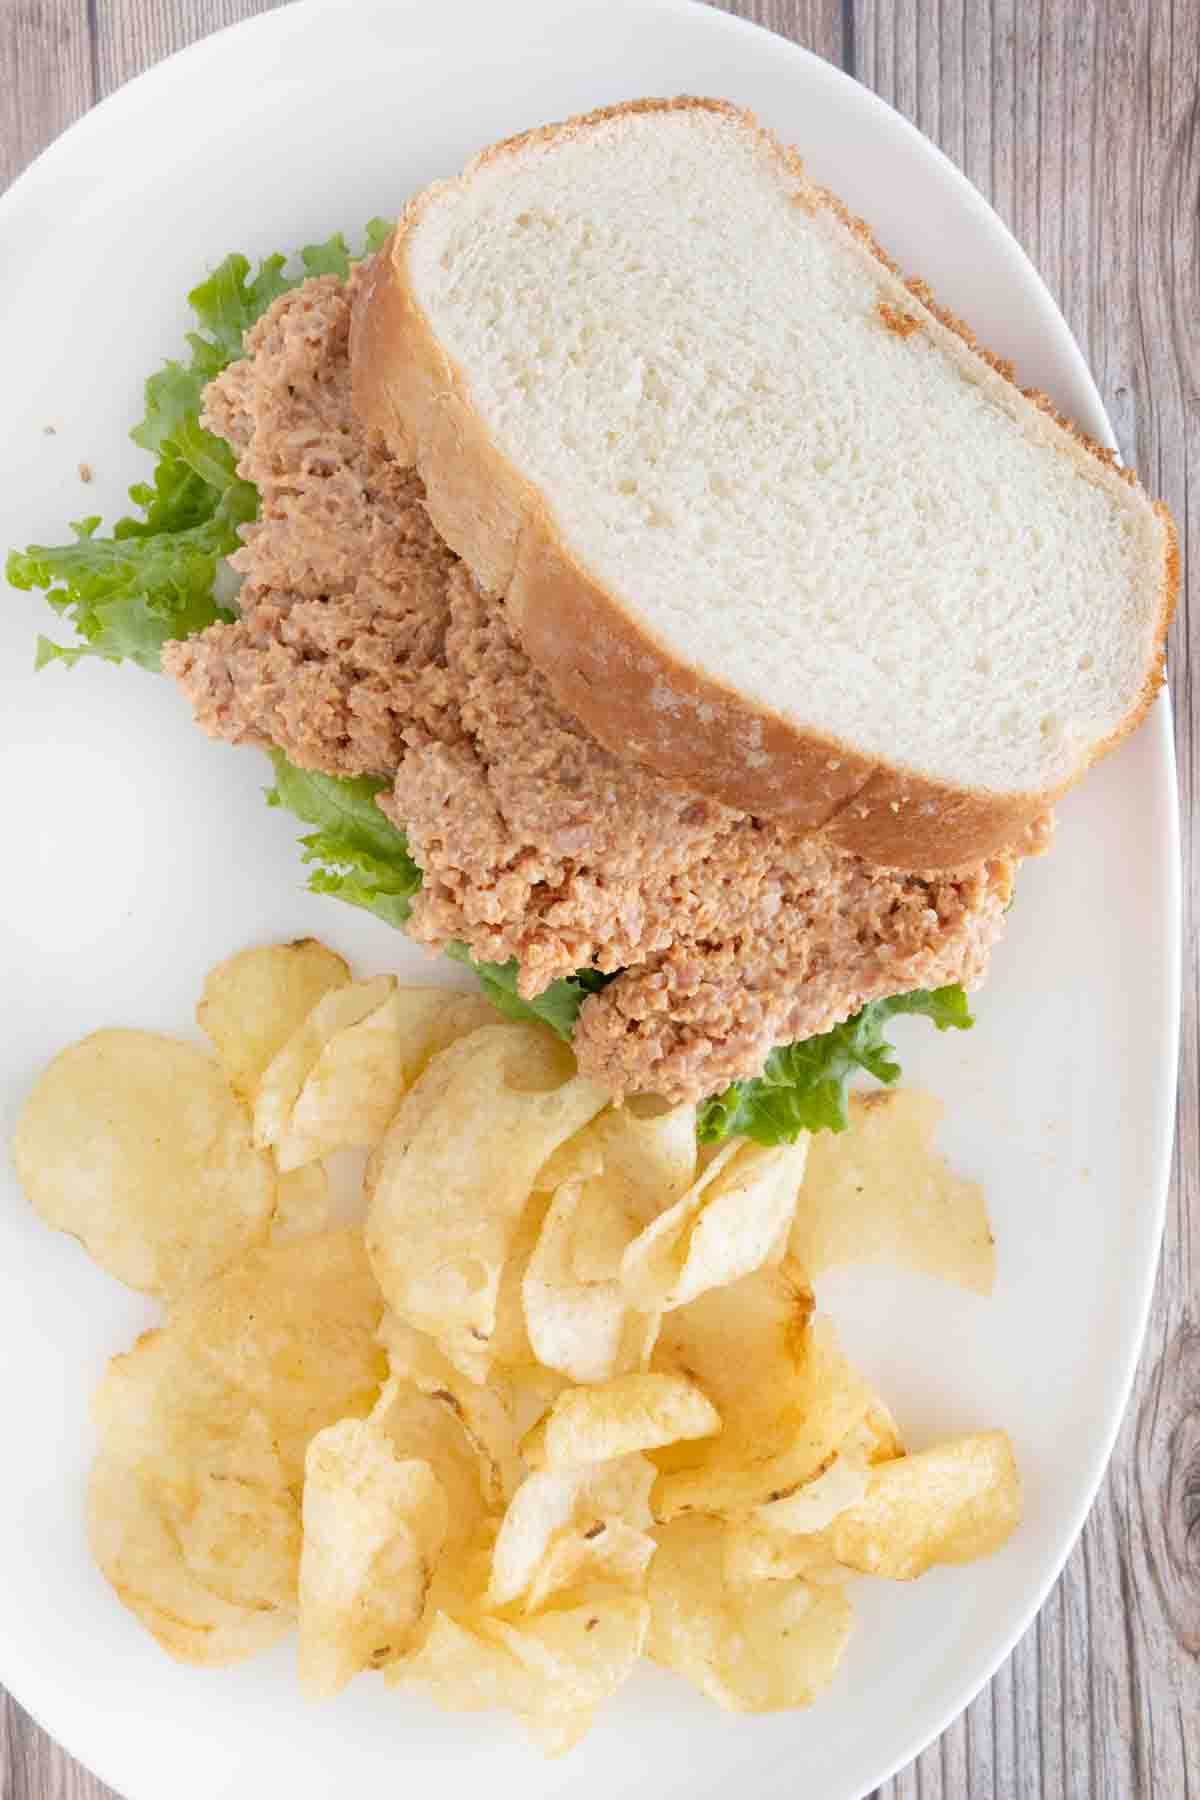 Deviled ham sandwich with potato chips on a white plate.